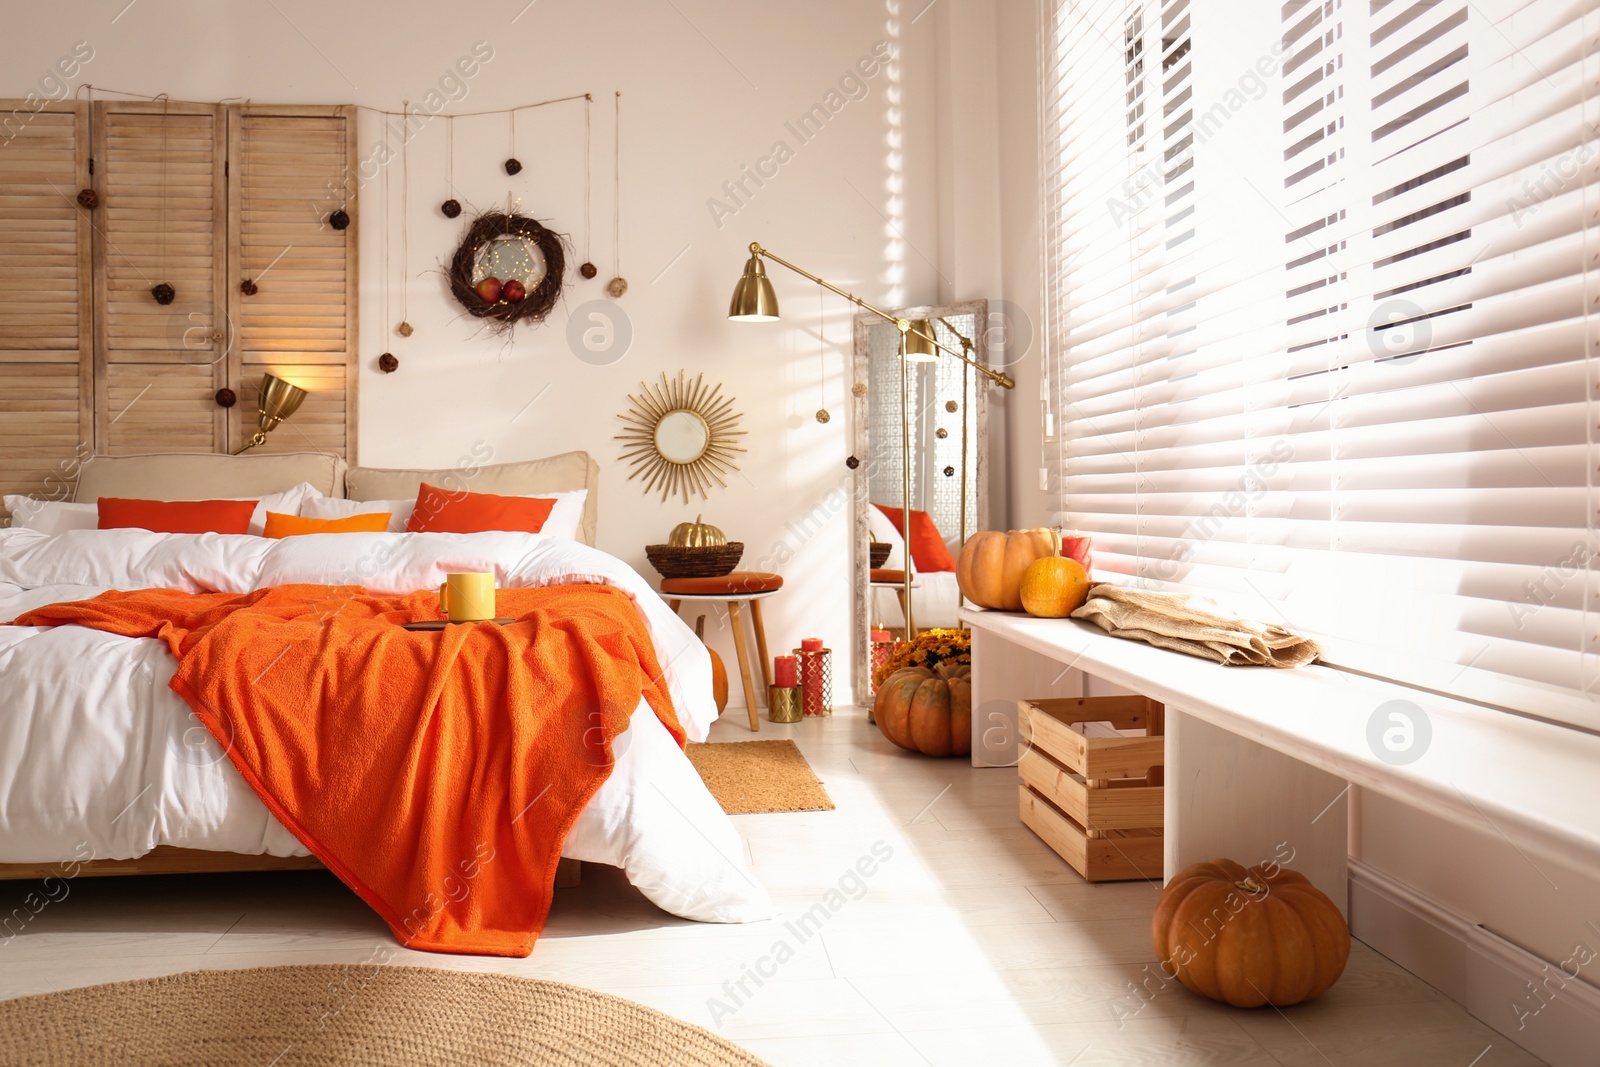 Photo of Cozy bedroom interior inspired by autumn colors